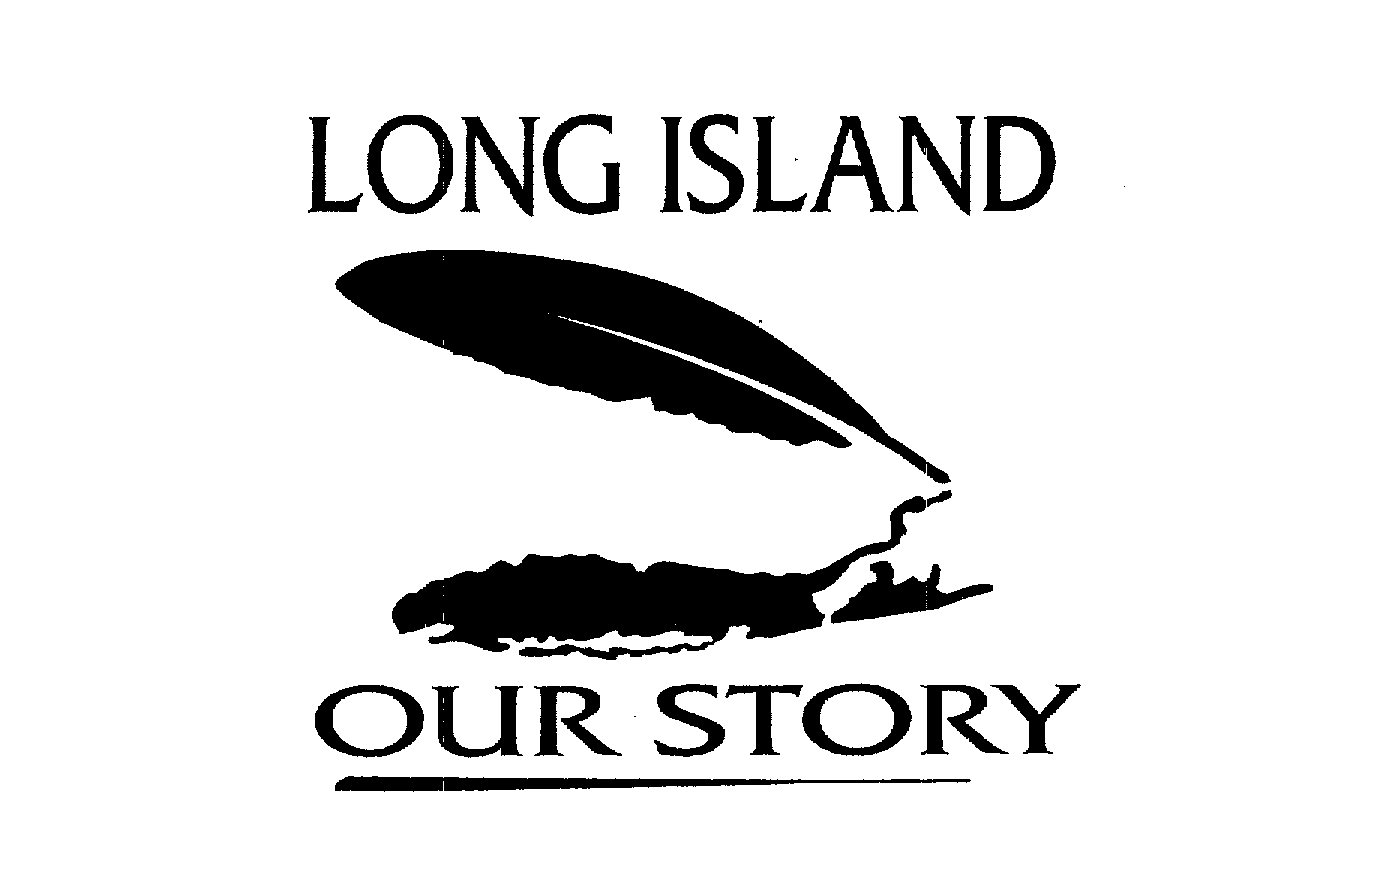 LONG ISLAND OUR STORY